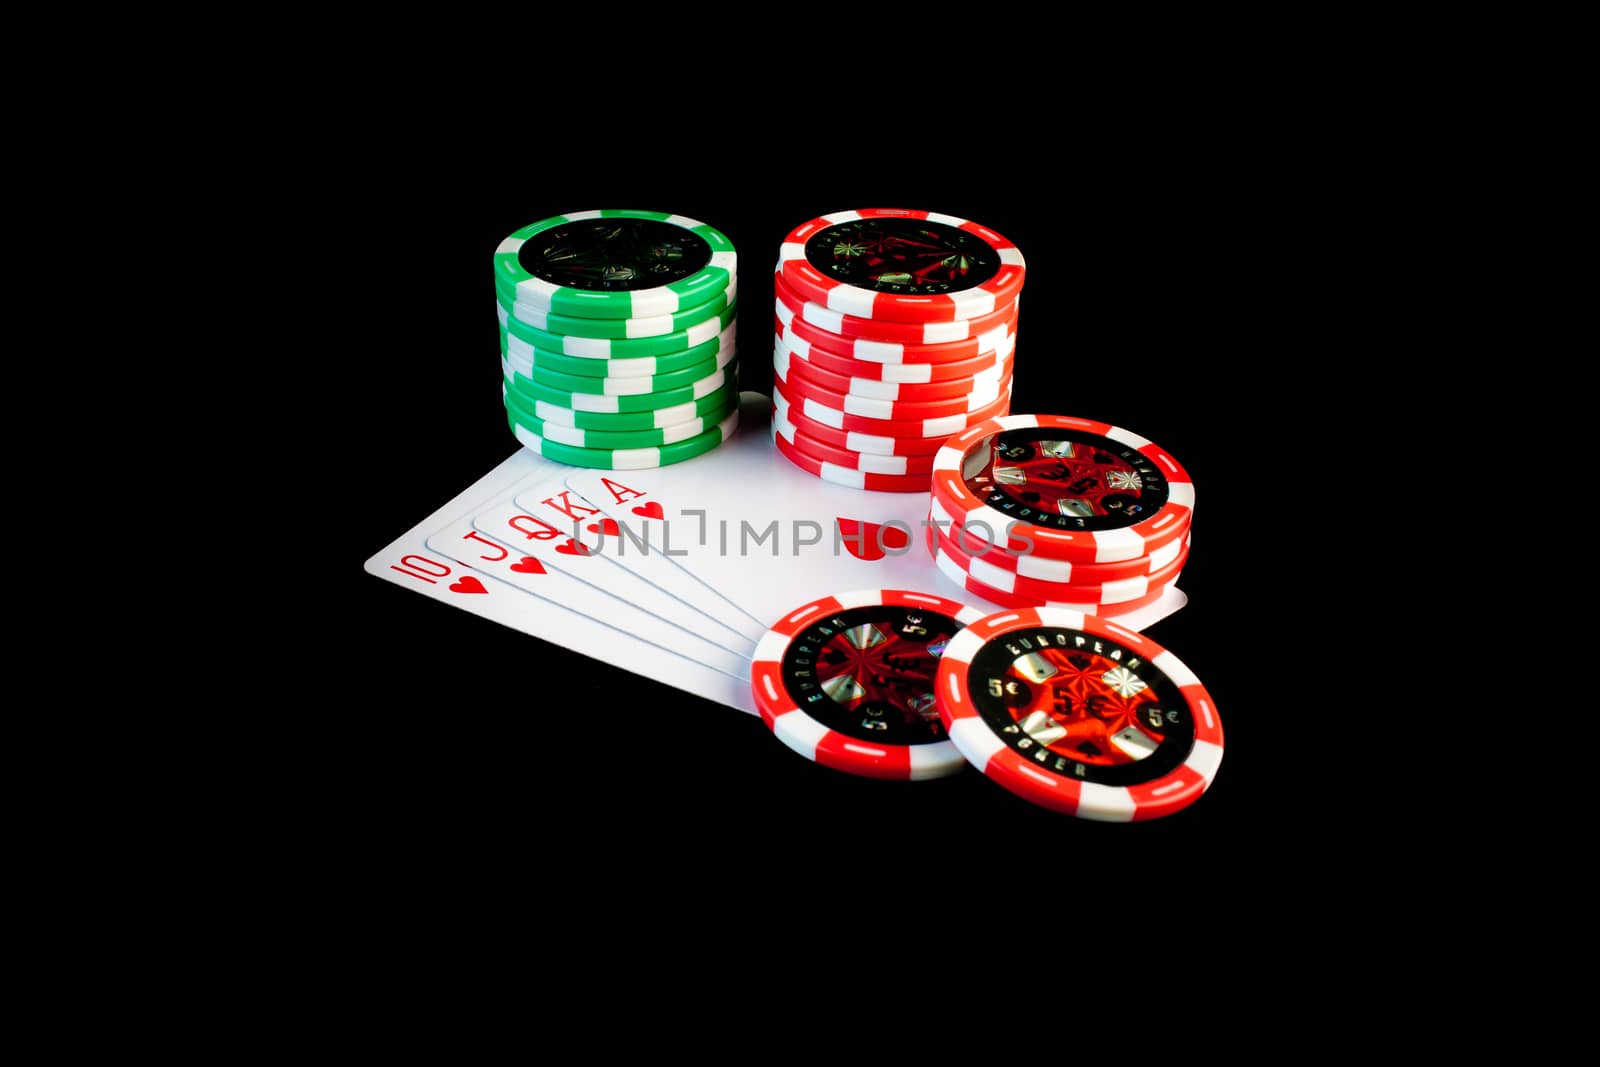 Poker chips stacked up on a winning hand